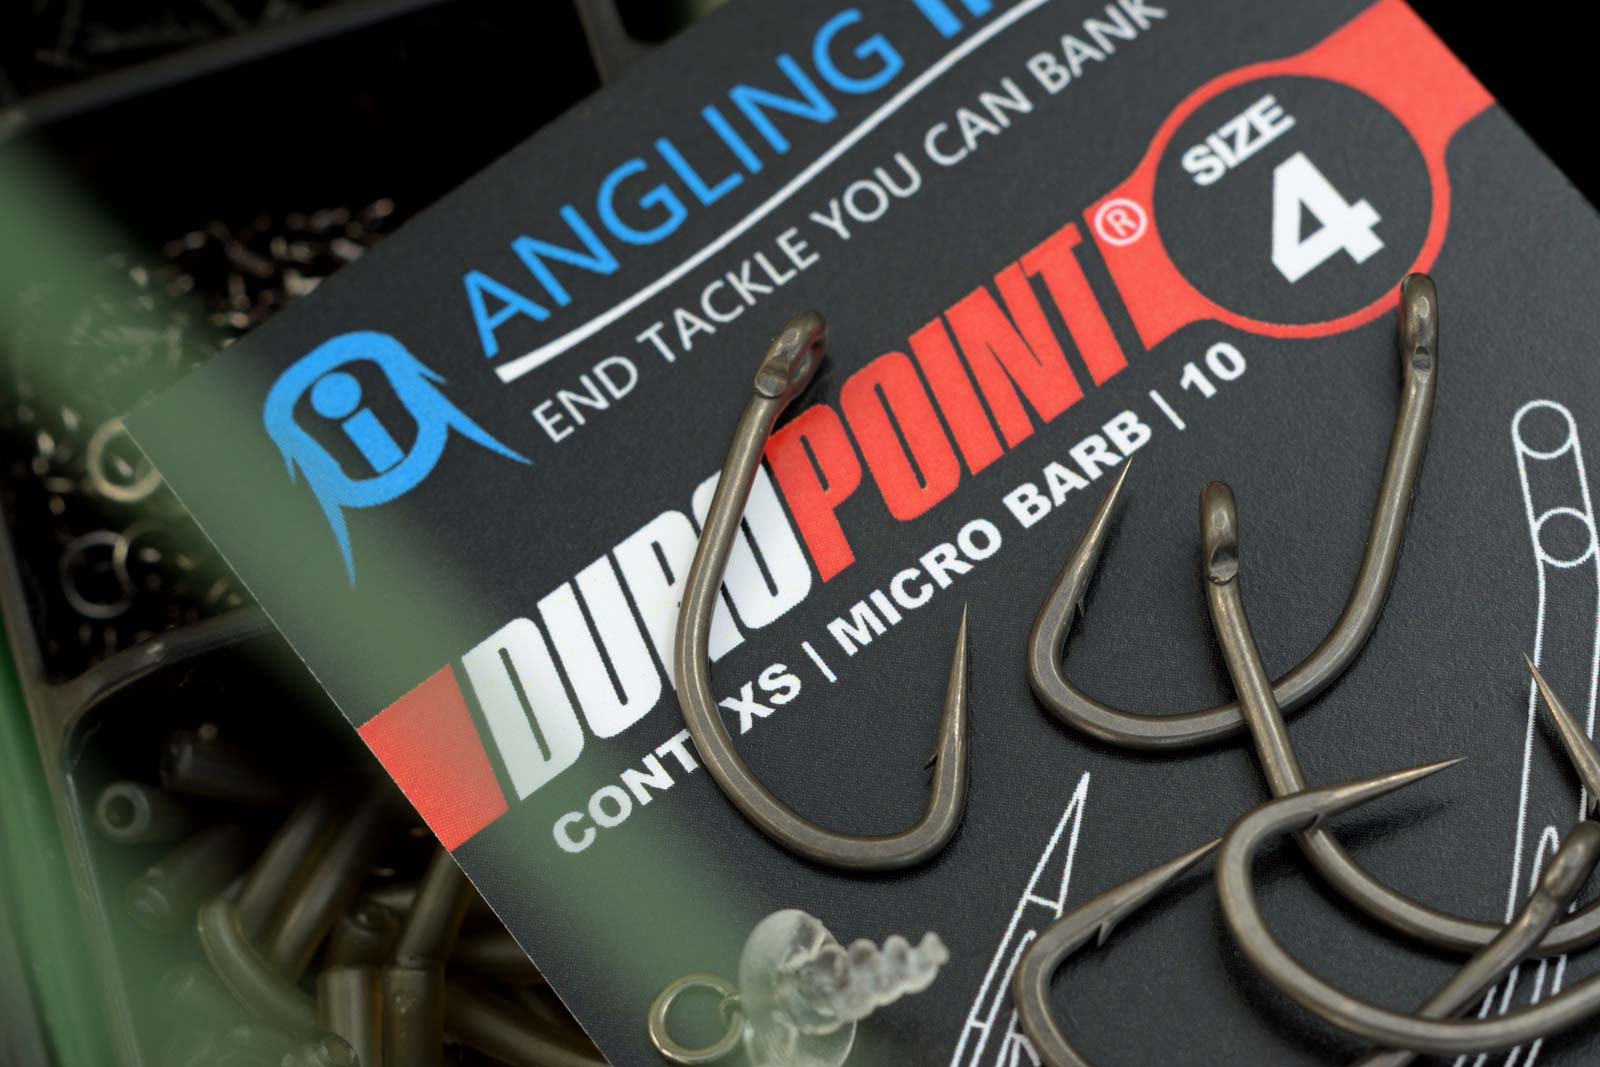 Duropoint Conti XS - The strongest carp hooks.